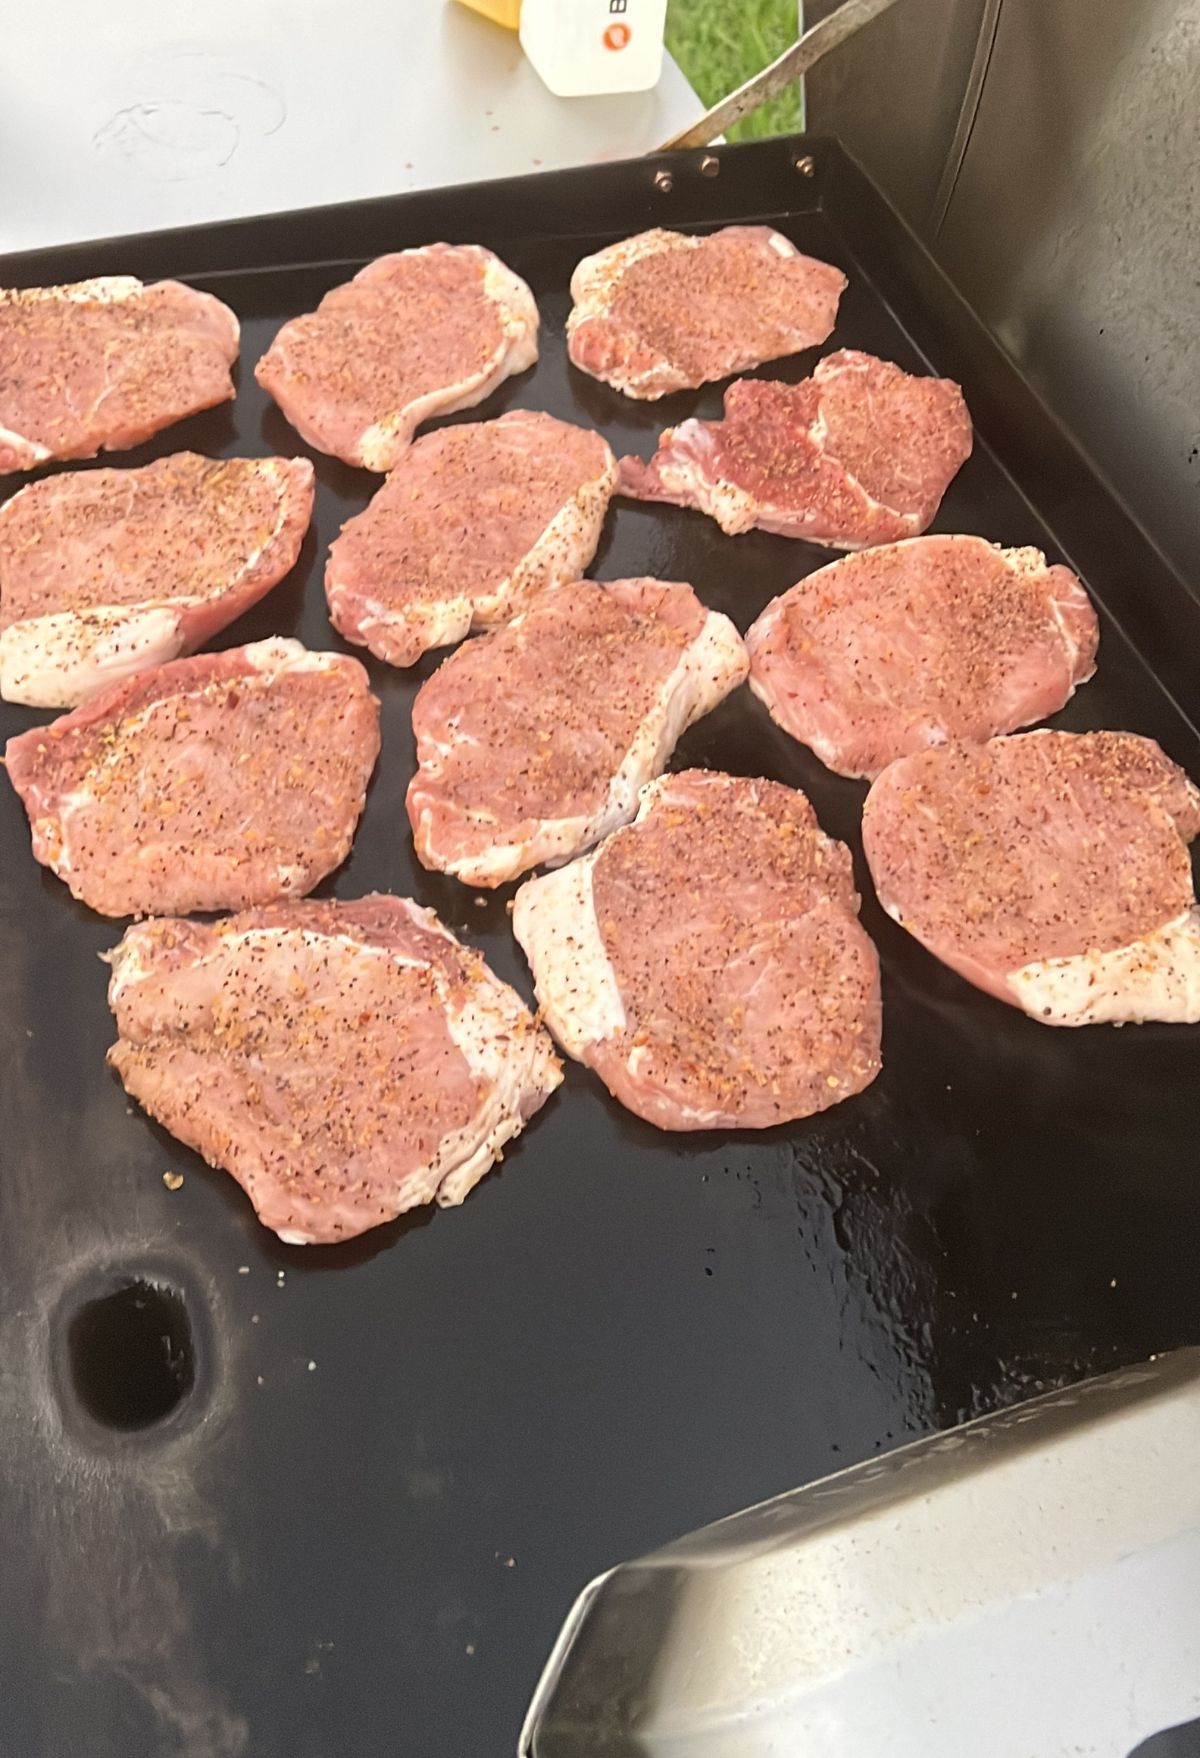 Several seasoned pork chops cooking on a flat grill.